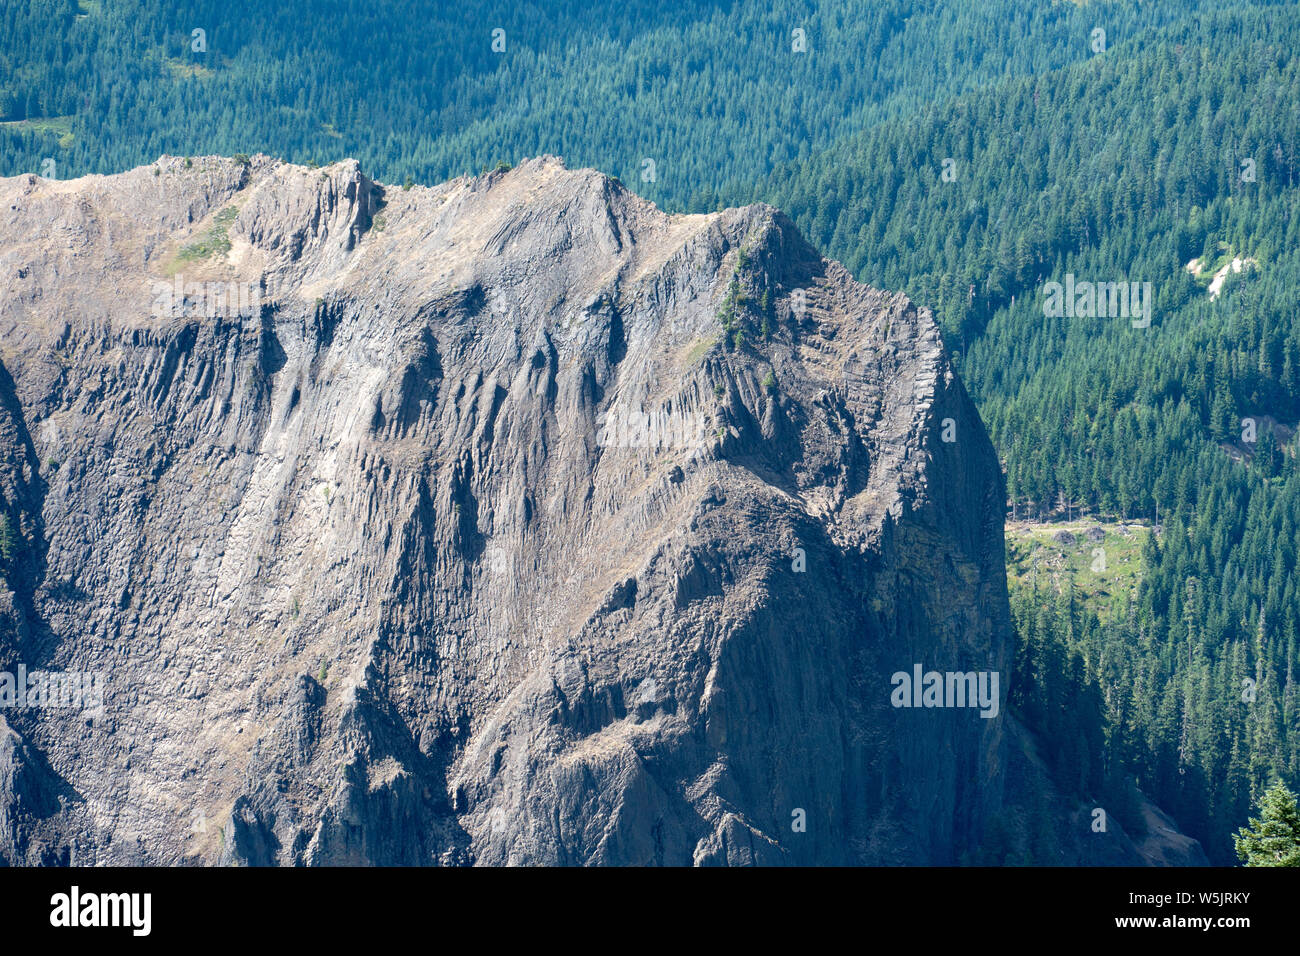 Monolith of intrusive igneous rock --1200 foot high Wolf Rock in the western Oregon Cascades, USA Stock Photo